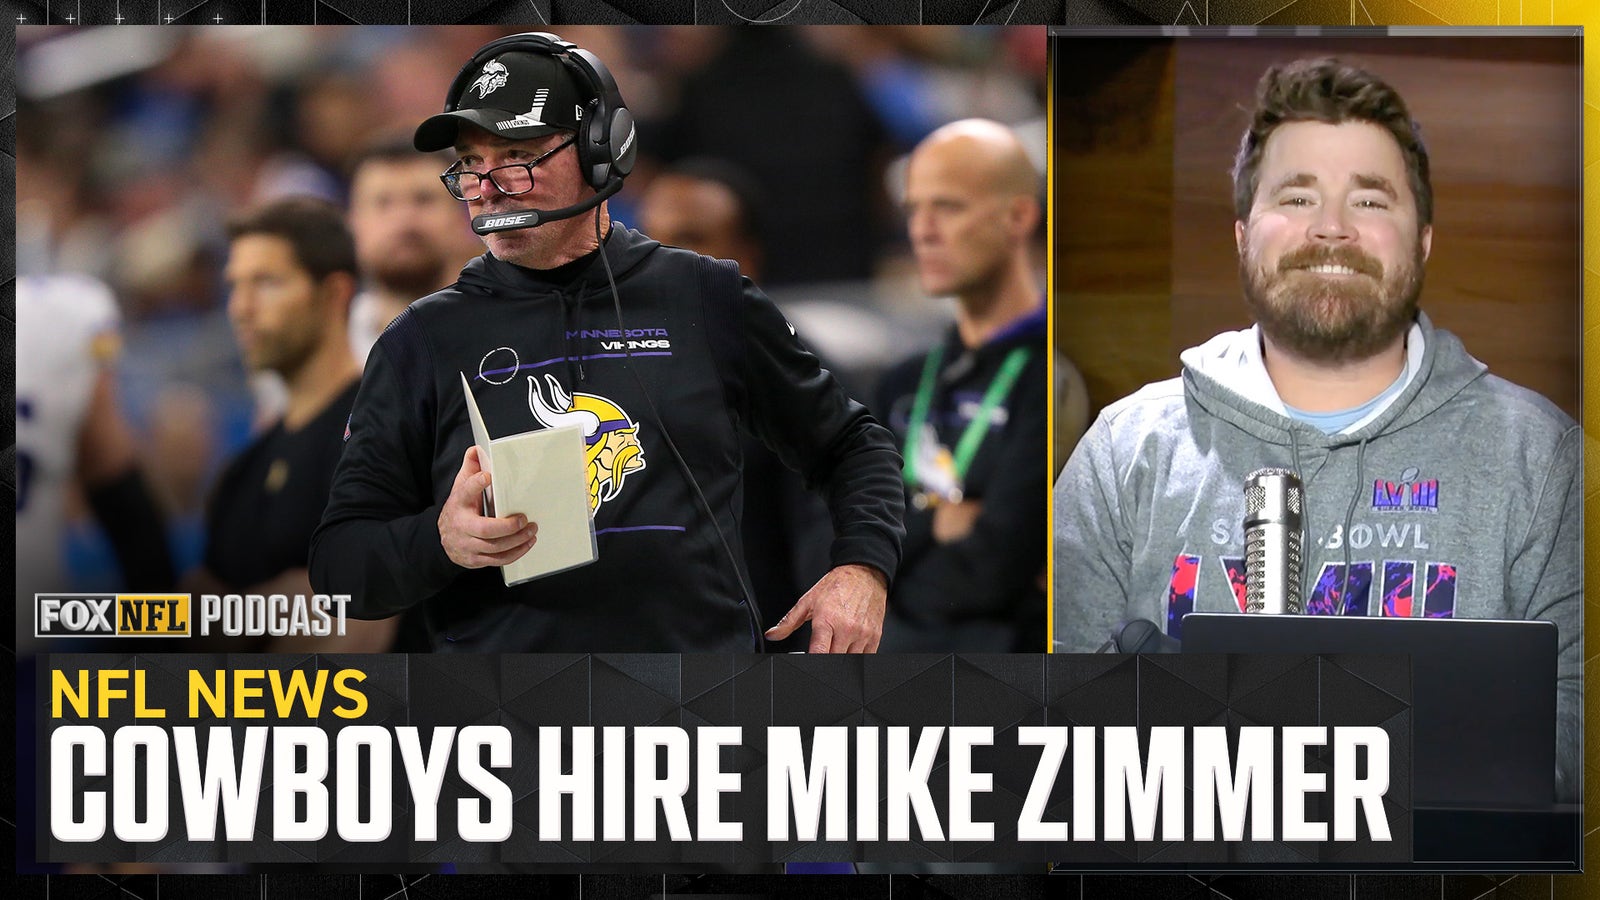 Mike Zimmer hired as Dallas Cowboys' defensive coordinator 